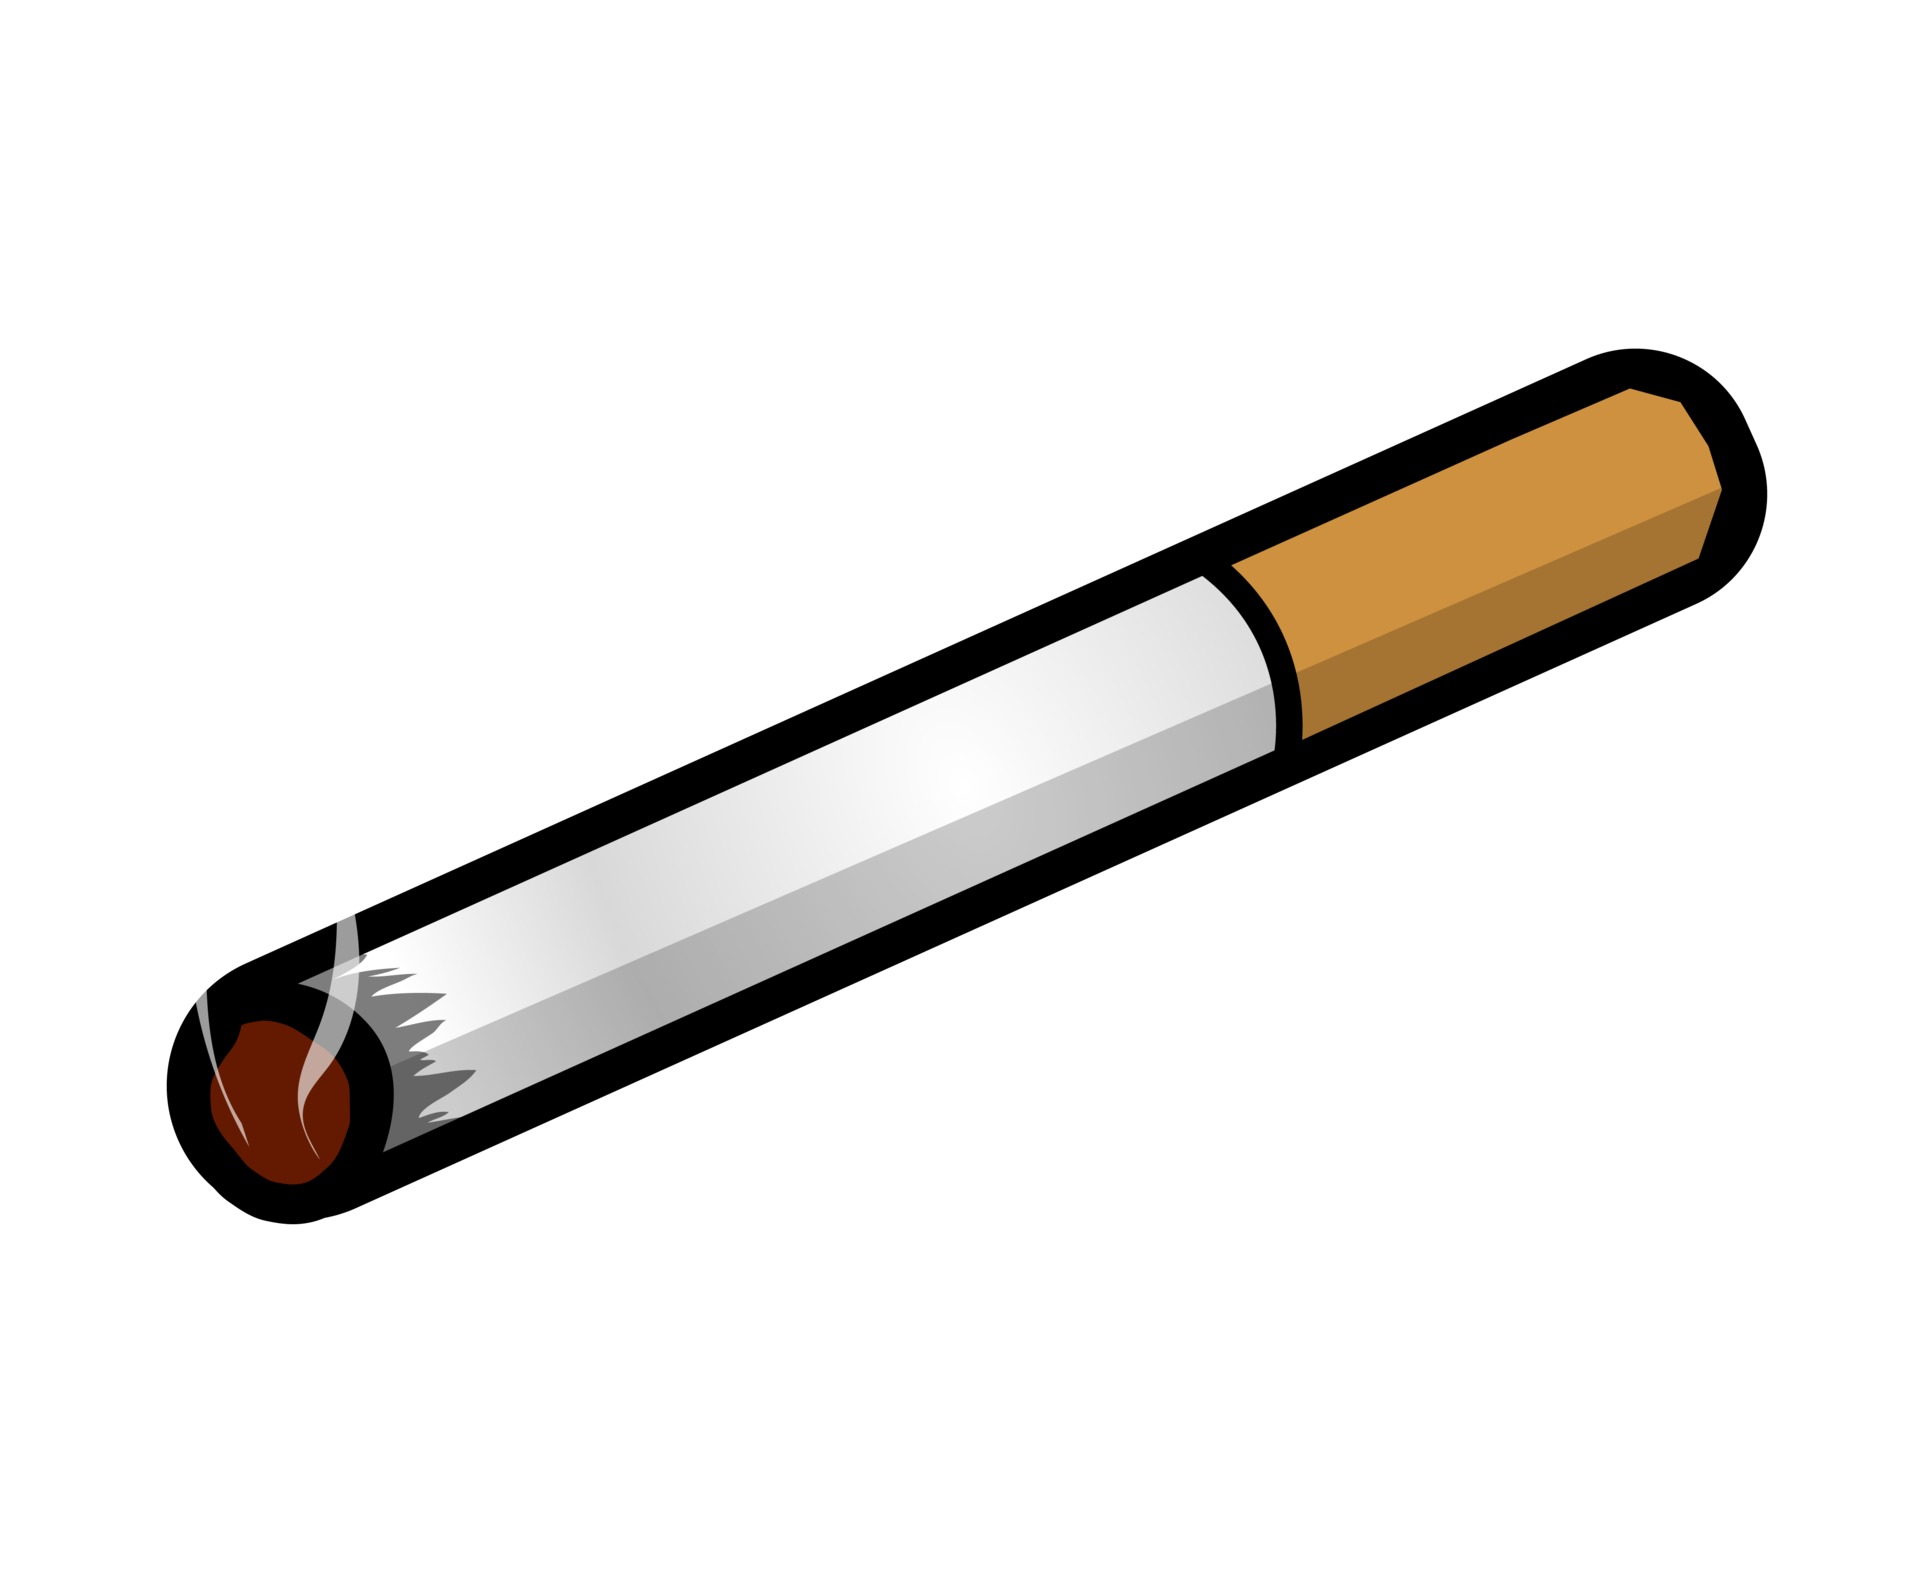 Cigarette Smoke PNGs for Free Download